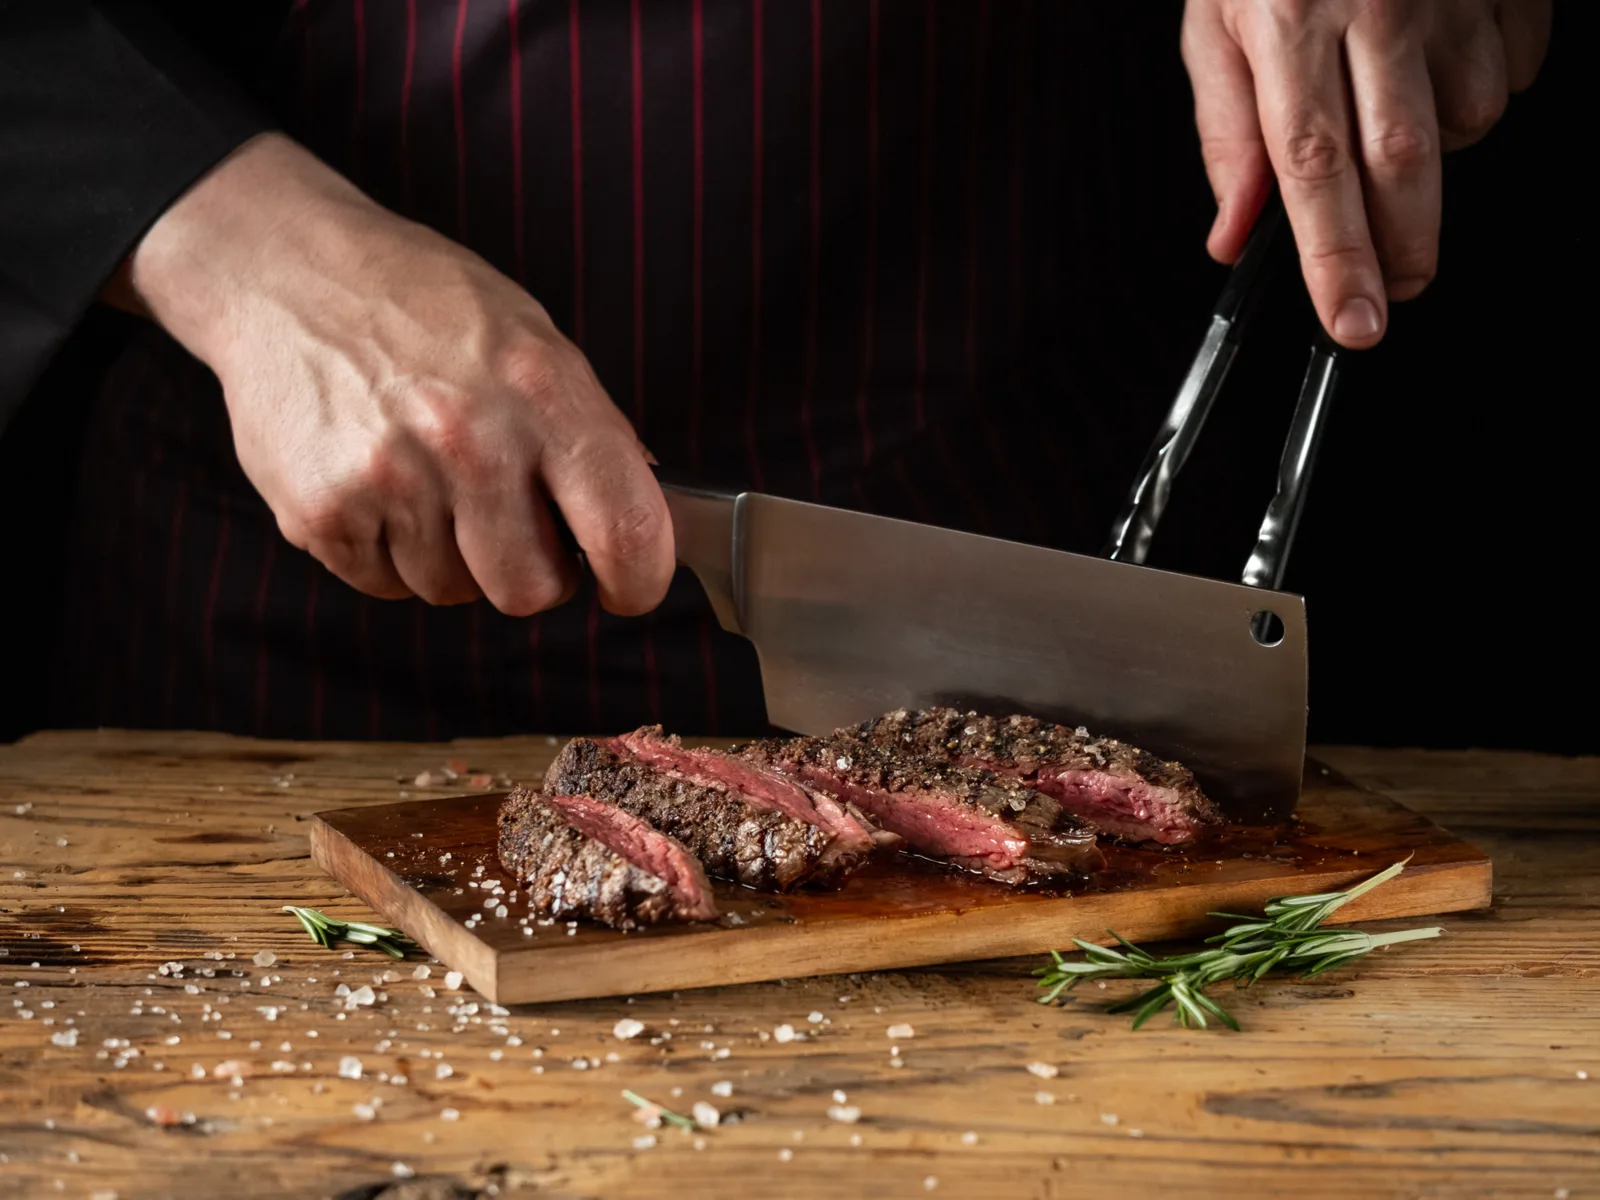 A chef cutting a salted steak on a wooden chopping board at Old Iceland Restaurant, one of the best restaurants in Iceland